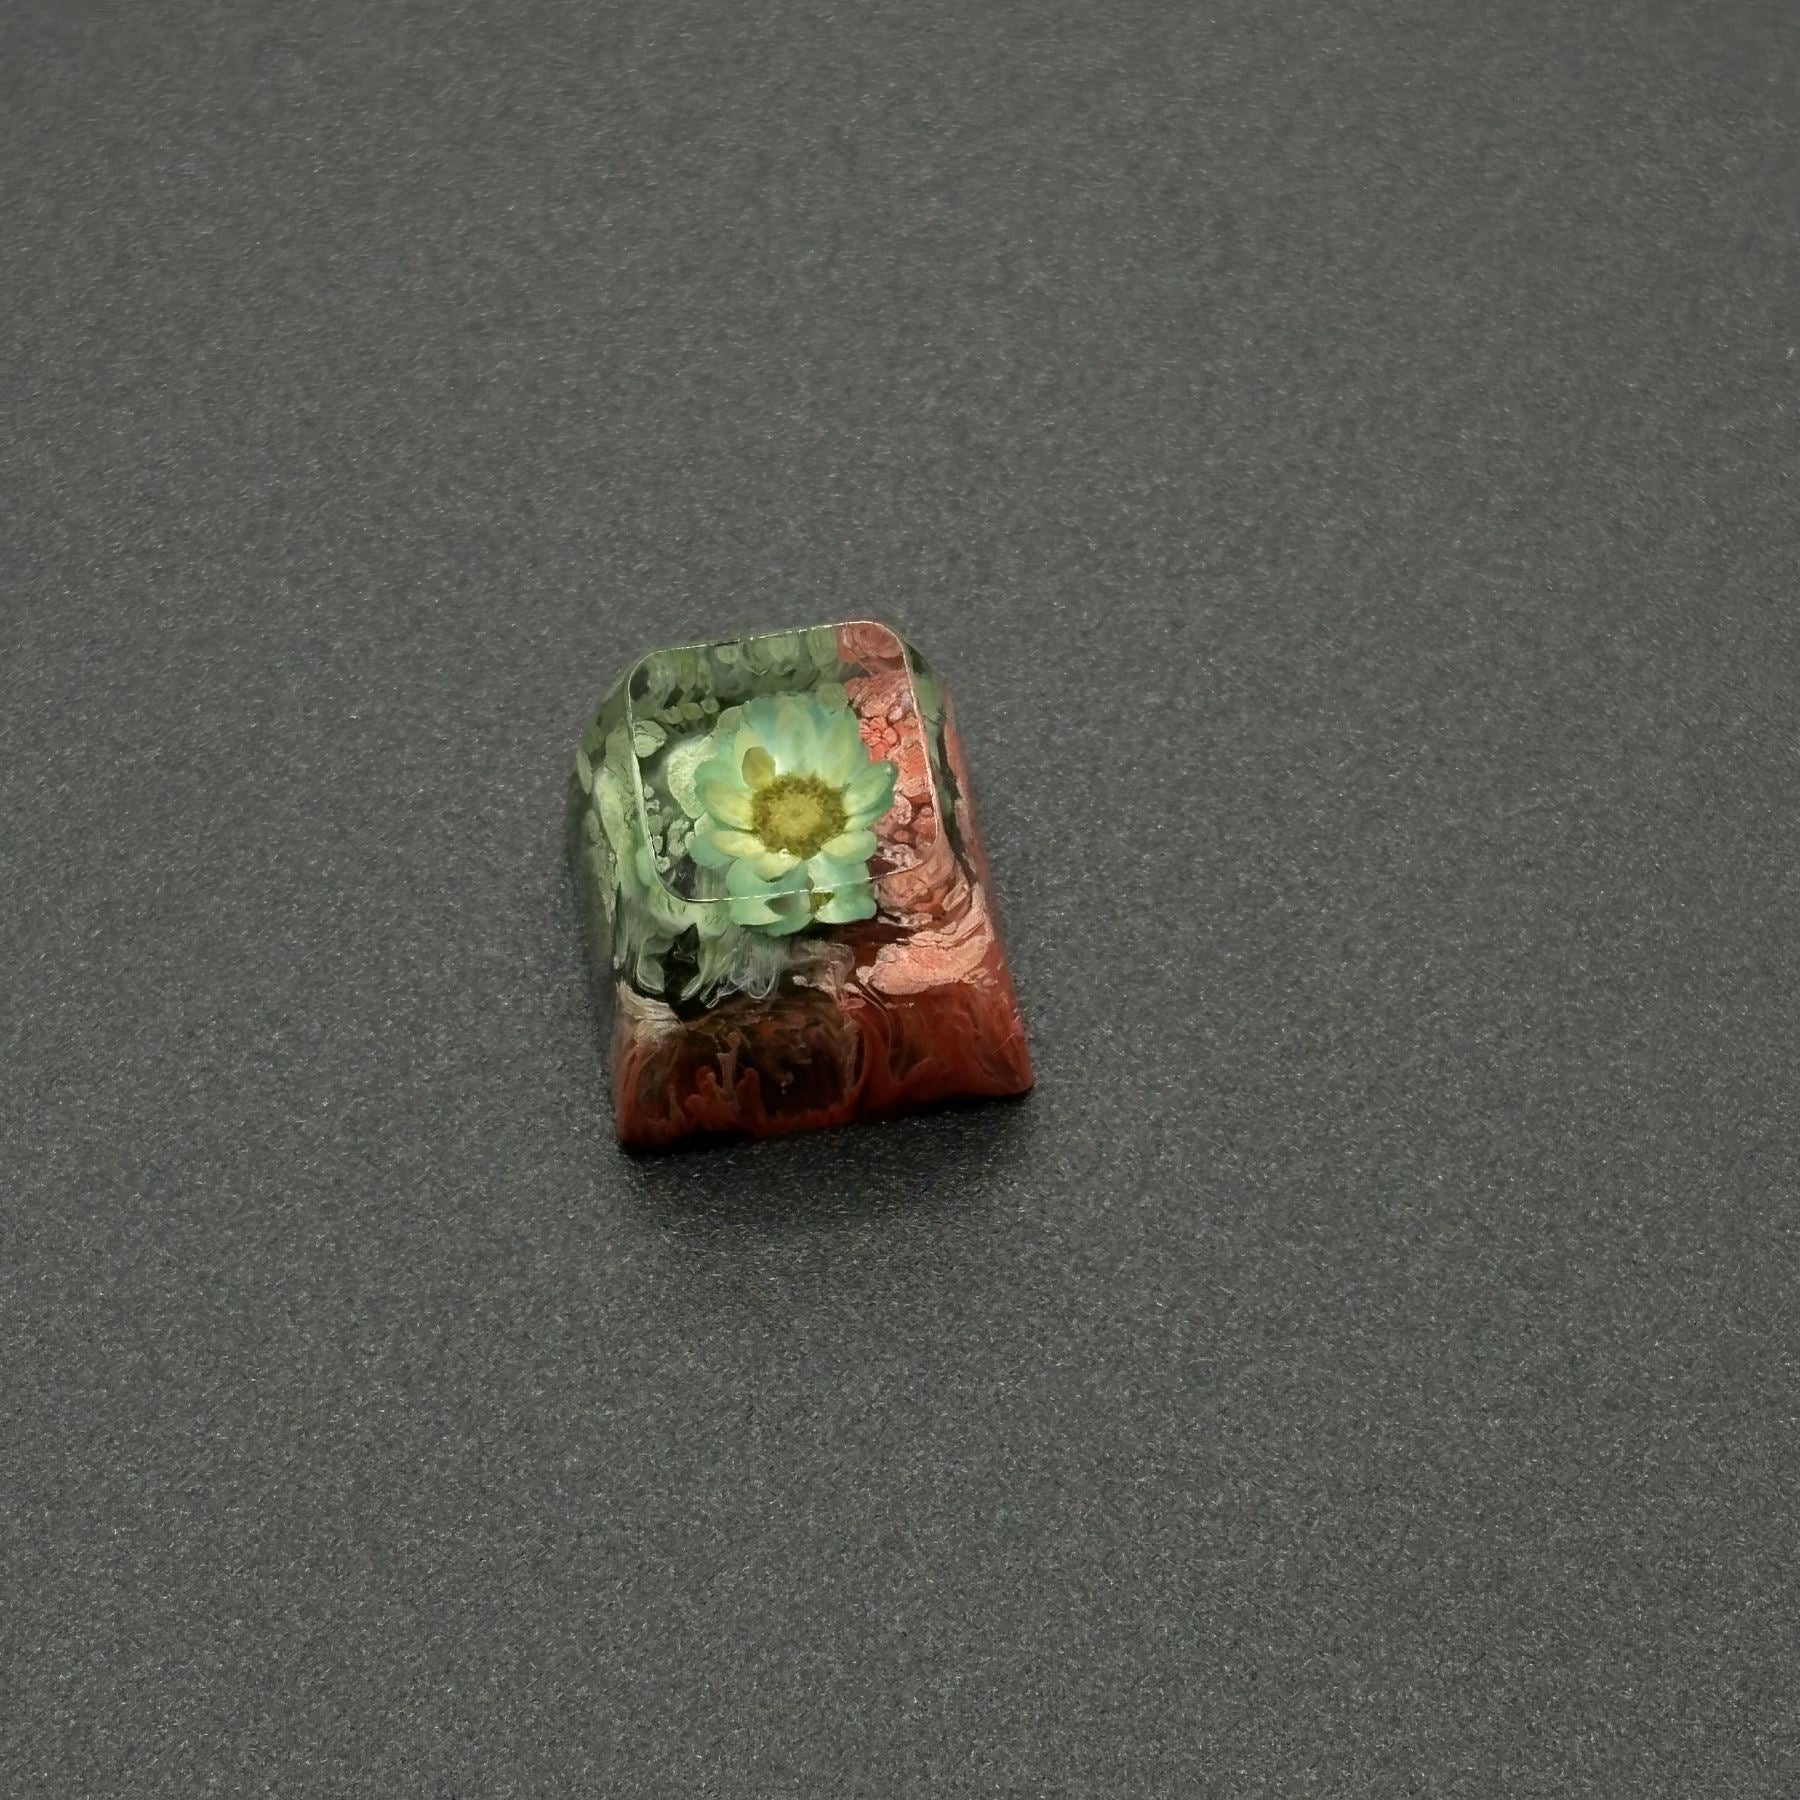 Resin Eternal Flower Keycap: Elevate Your Keyboard with Handcrafted Floral Artistry